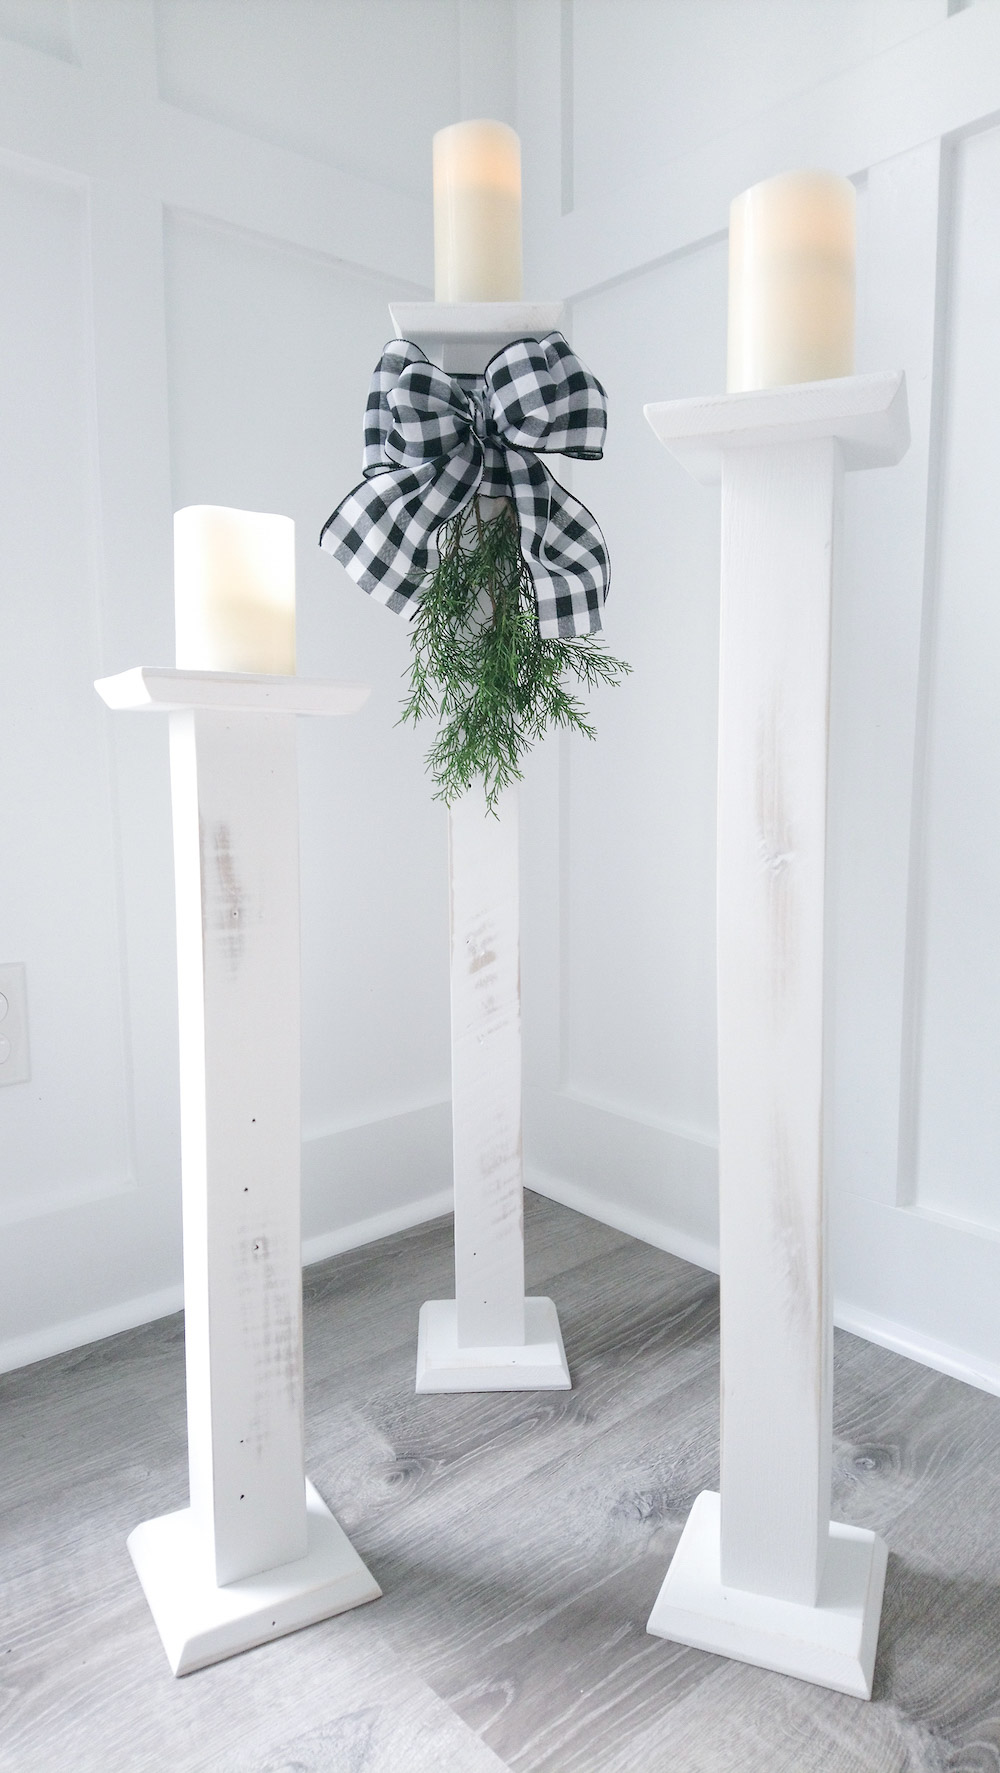 Three LED Light candles sitting on DIY floor candle sticks with a black and white bow in the center